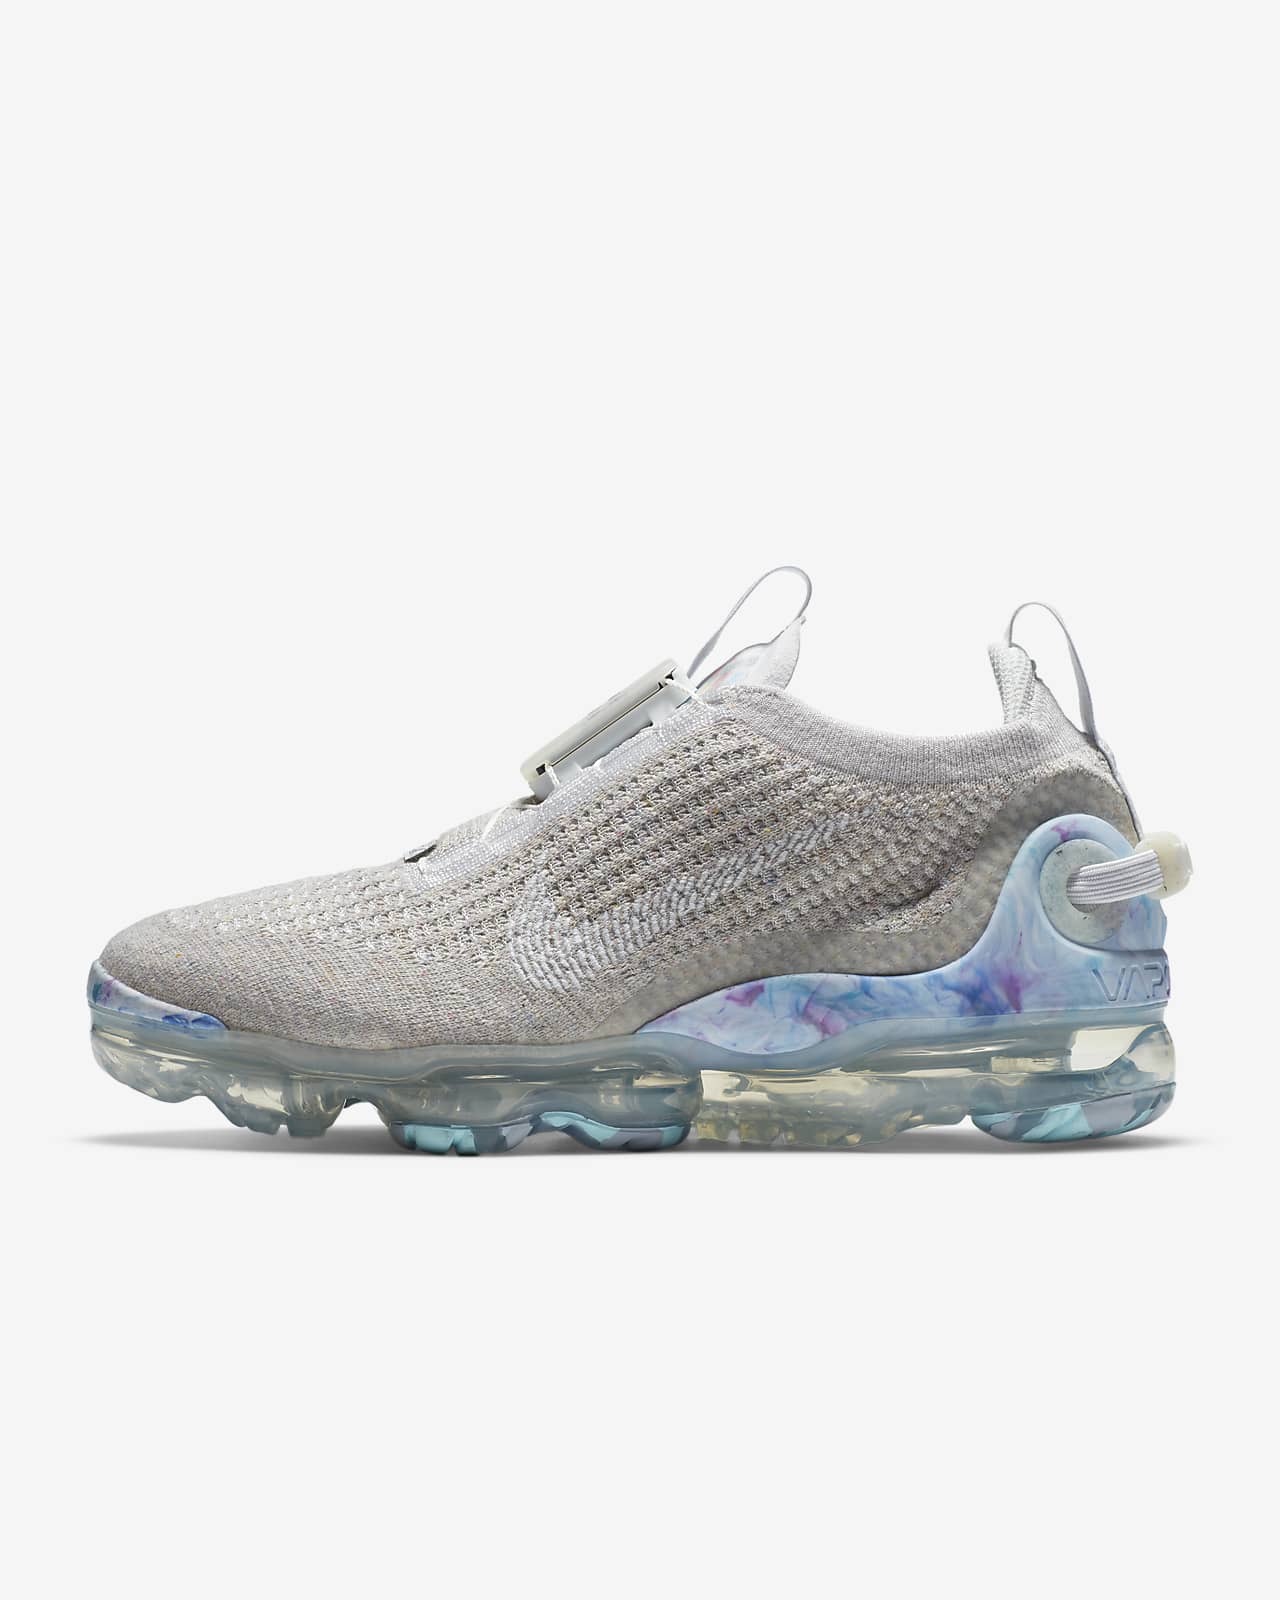 Shoes and Shoes Nike Vapormax Flyknit Off White 14.05.2020